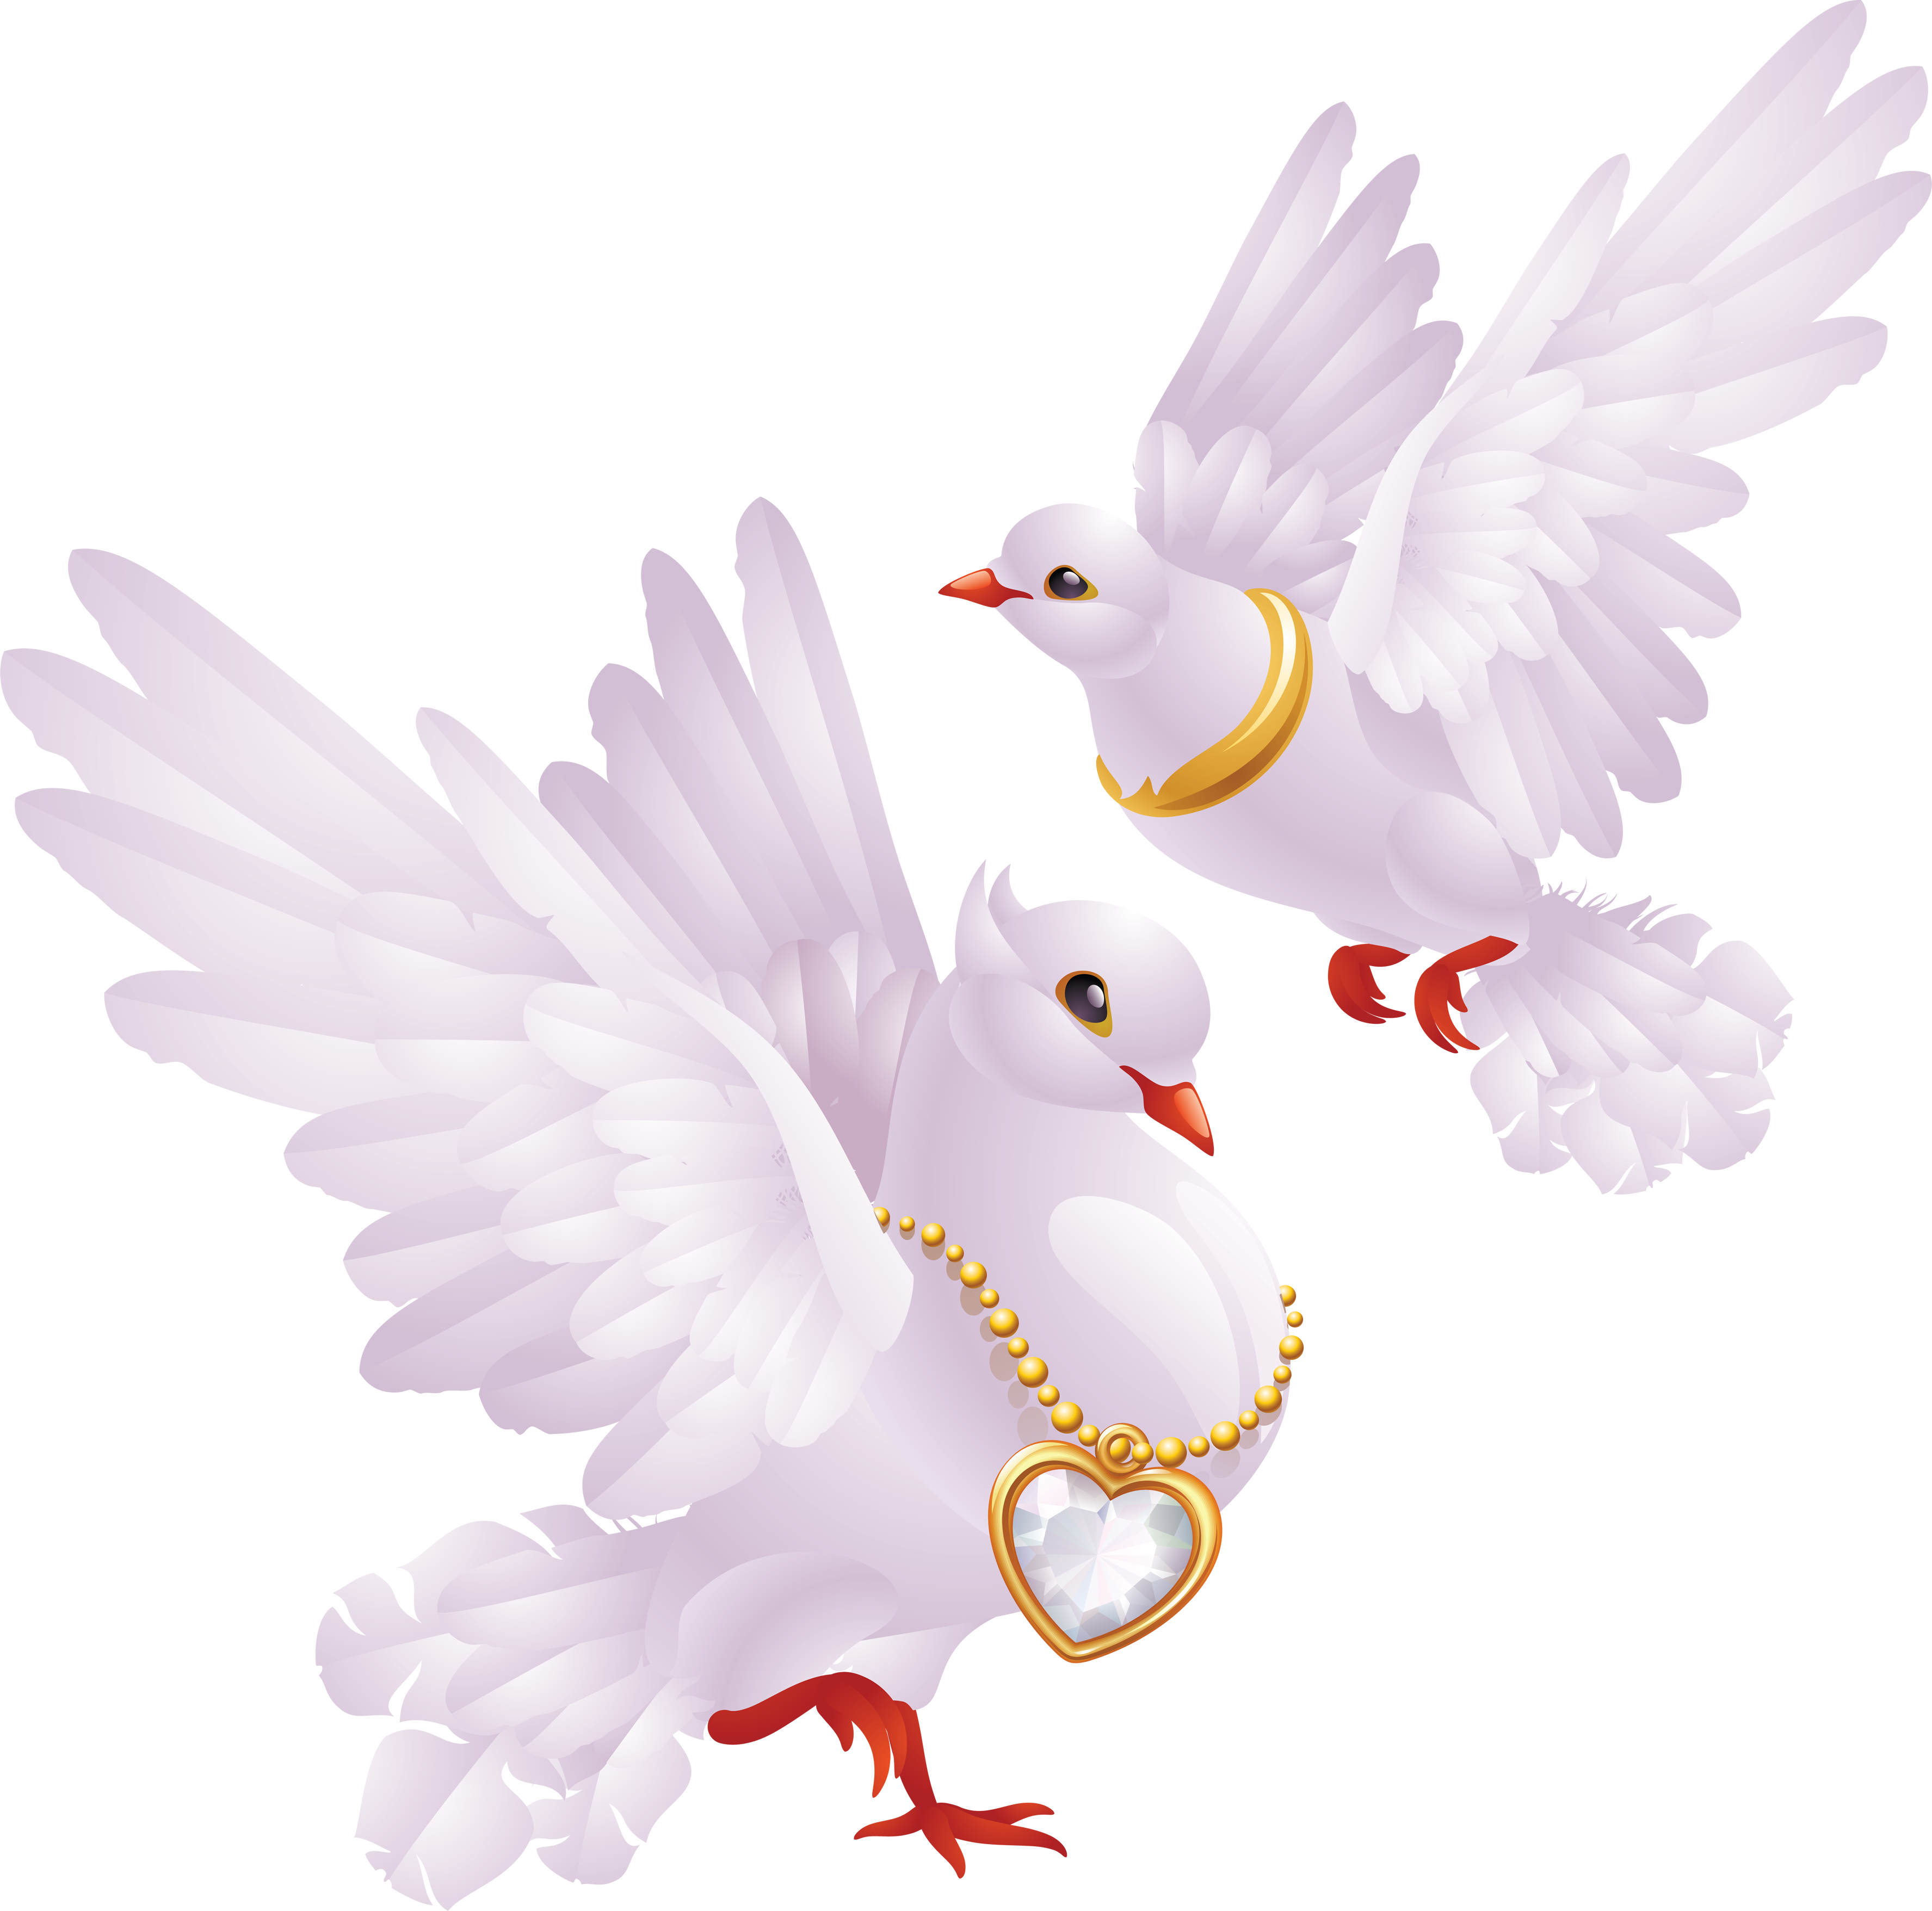 Pigeon clipart pigeon peace. Love doves with gold